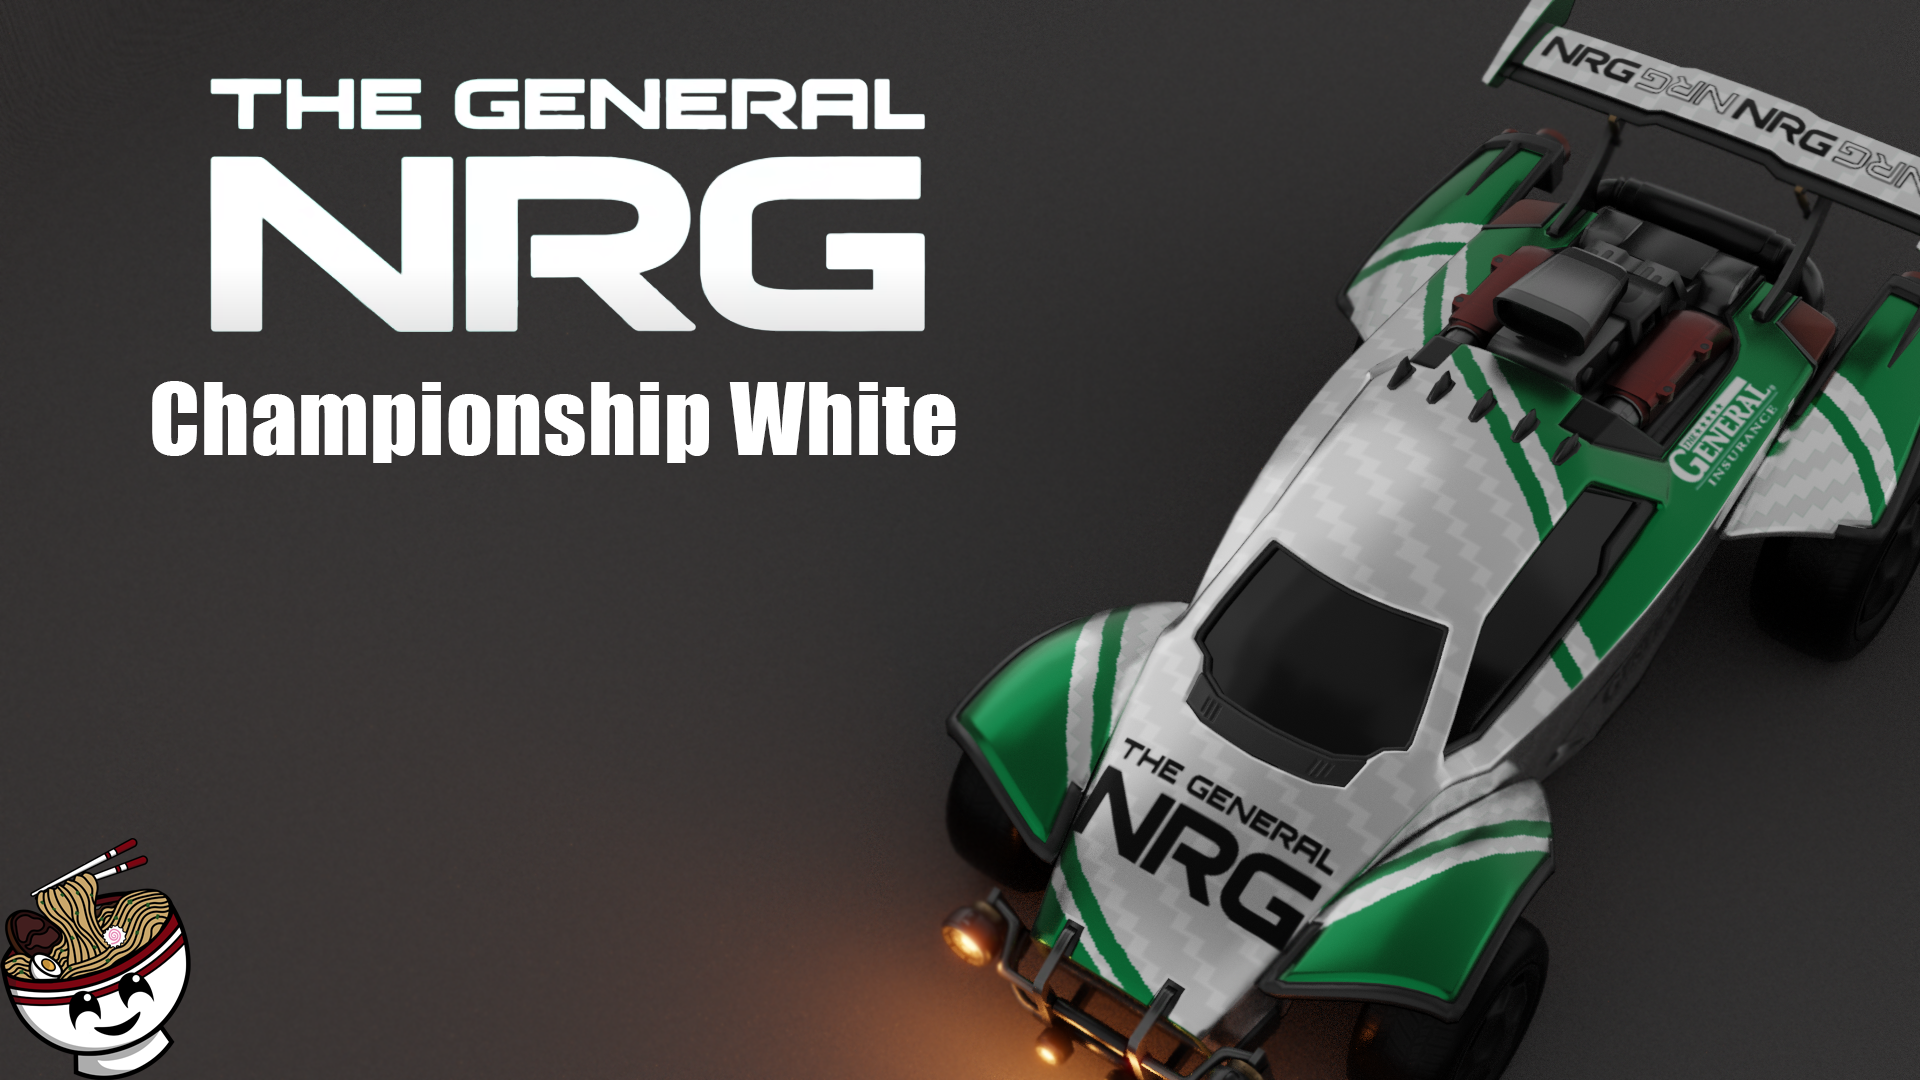 2020-2021 The General NRG (Championship White Edition)